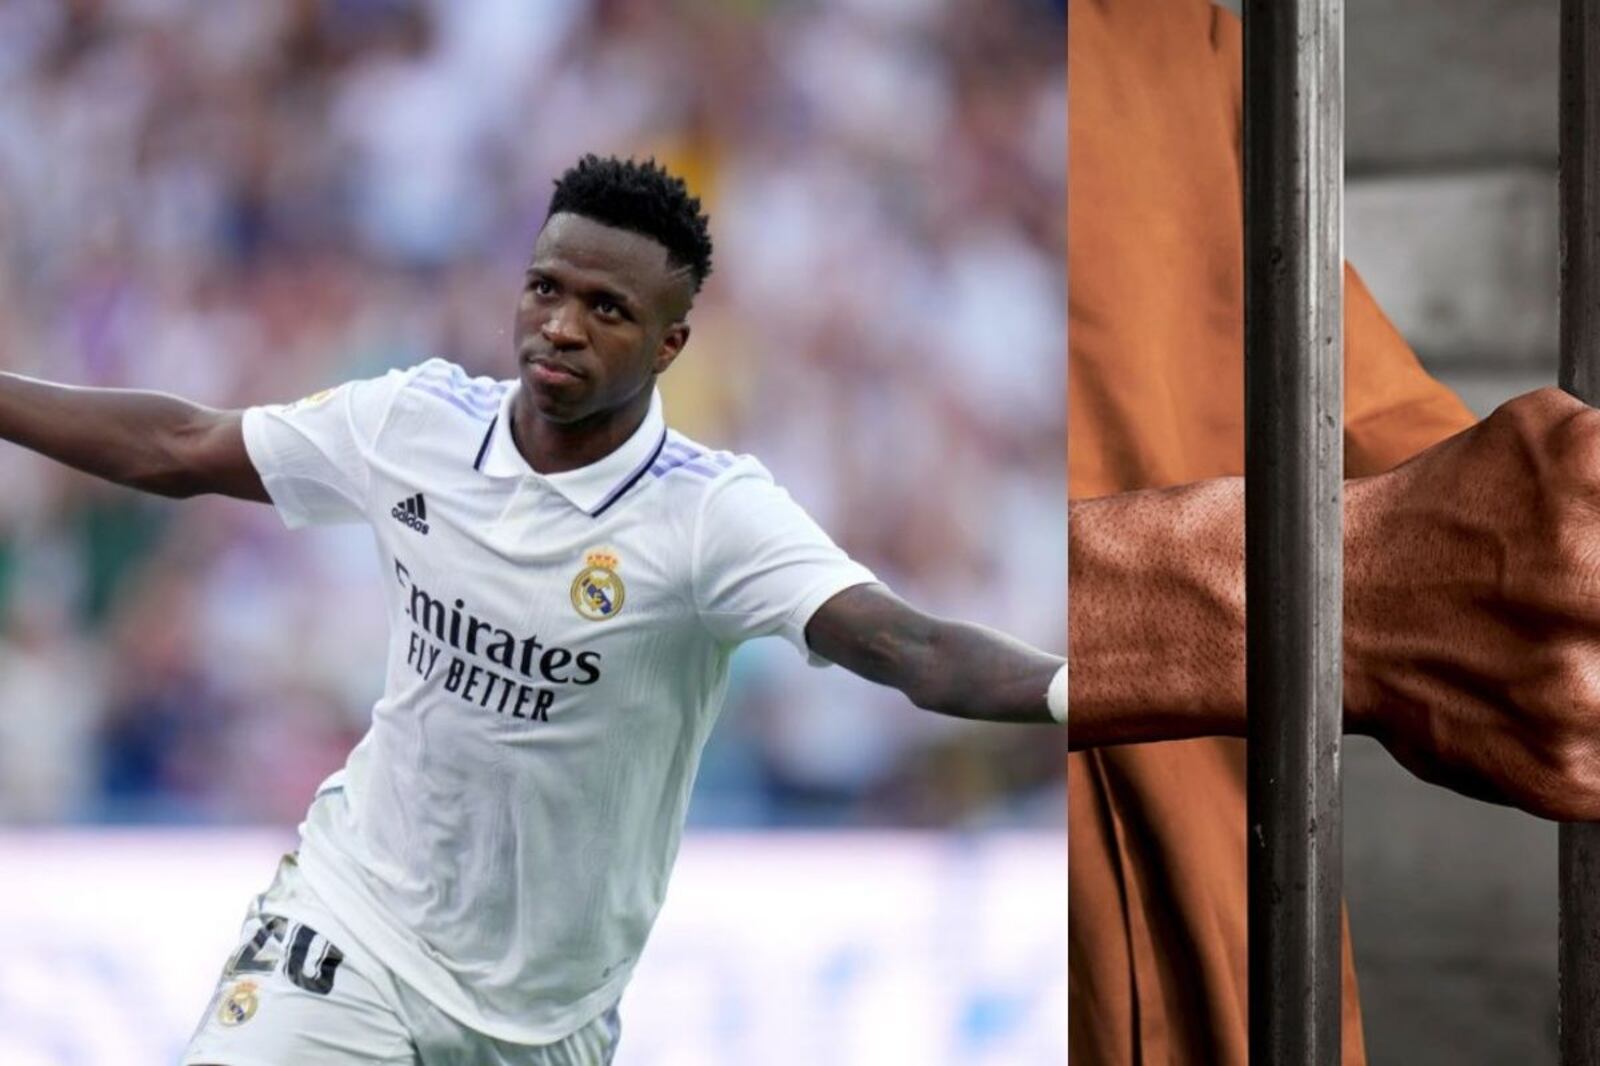 He was a star at Real Madrid, he was better than Vinicius, now he can get behind bars